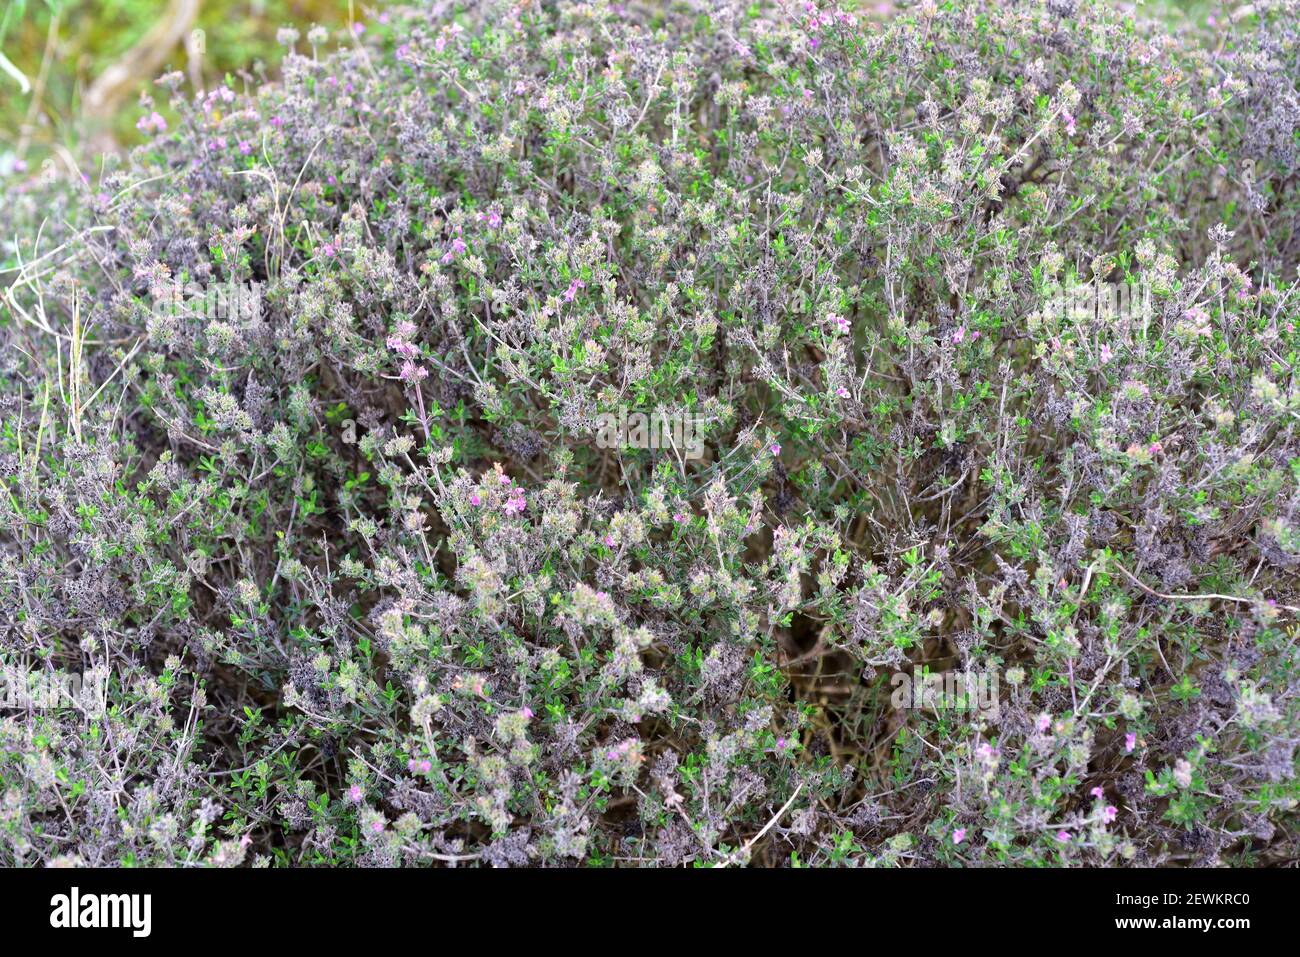 Pink savory or thyme-leaved savory (Satureja thymbra) is an aromatic shrub native to eastern Mediterranean basin. Stock Photo